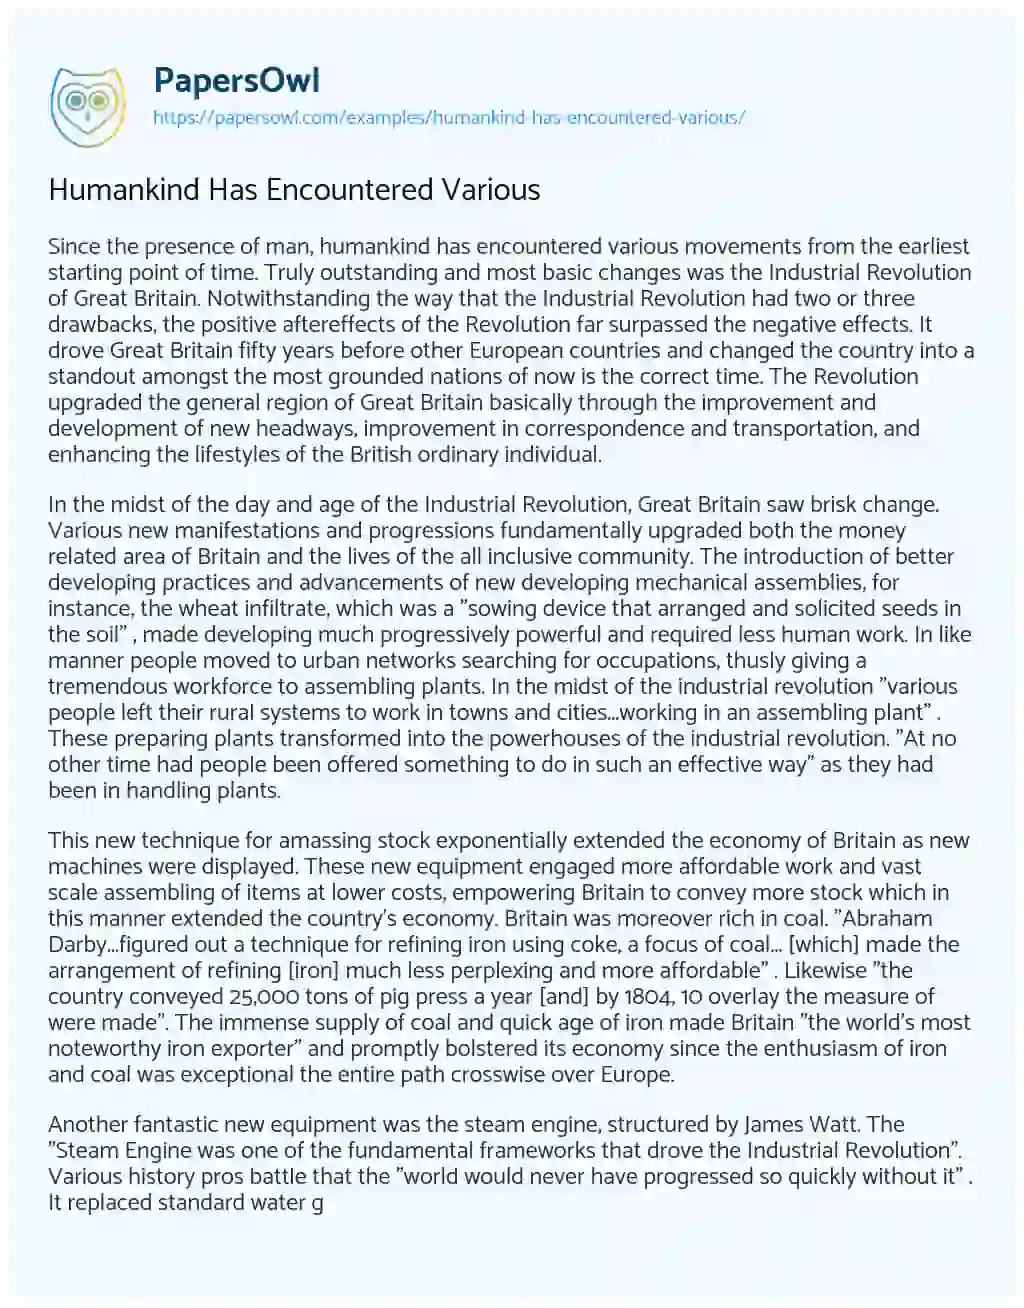 Essay on Humankind has Encountered Various